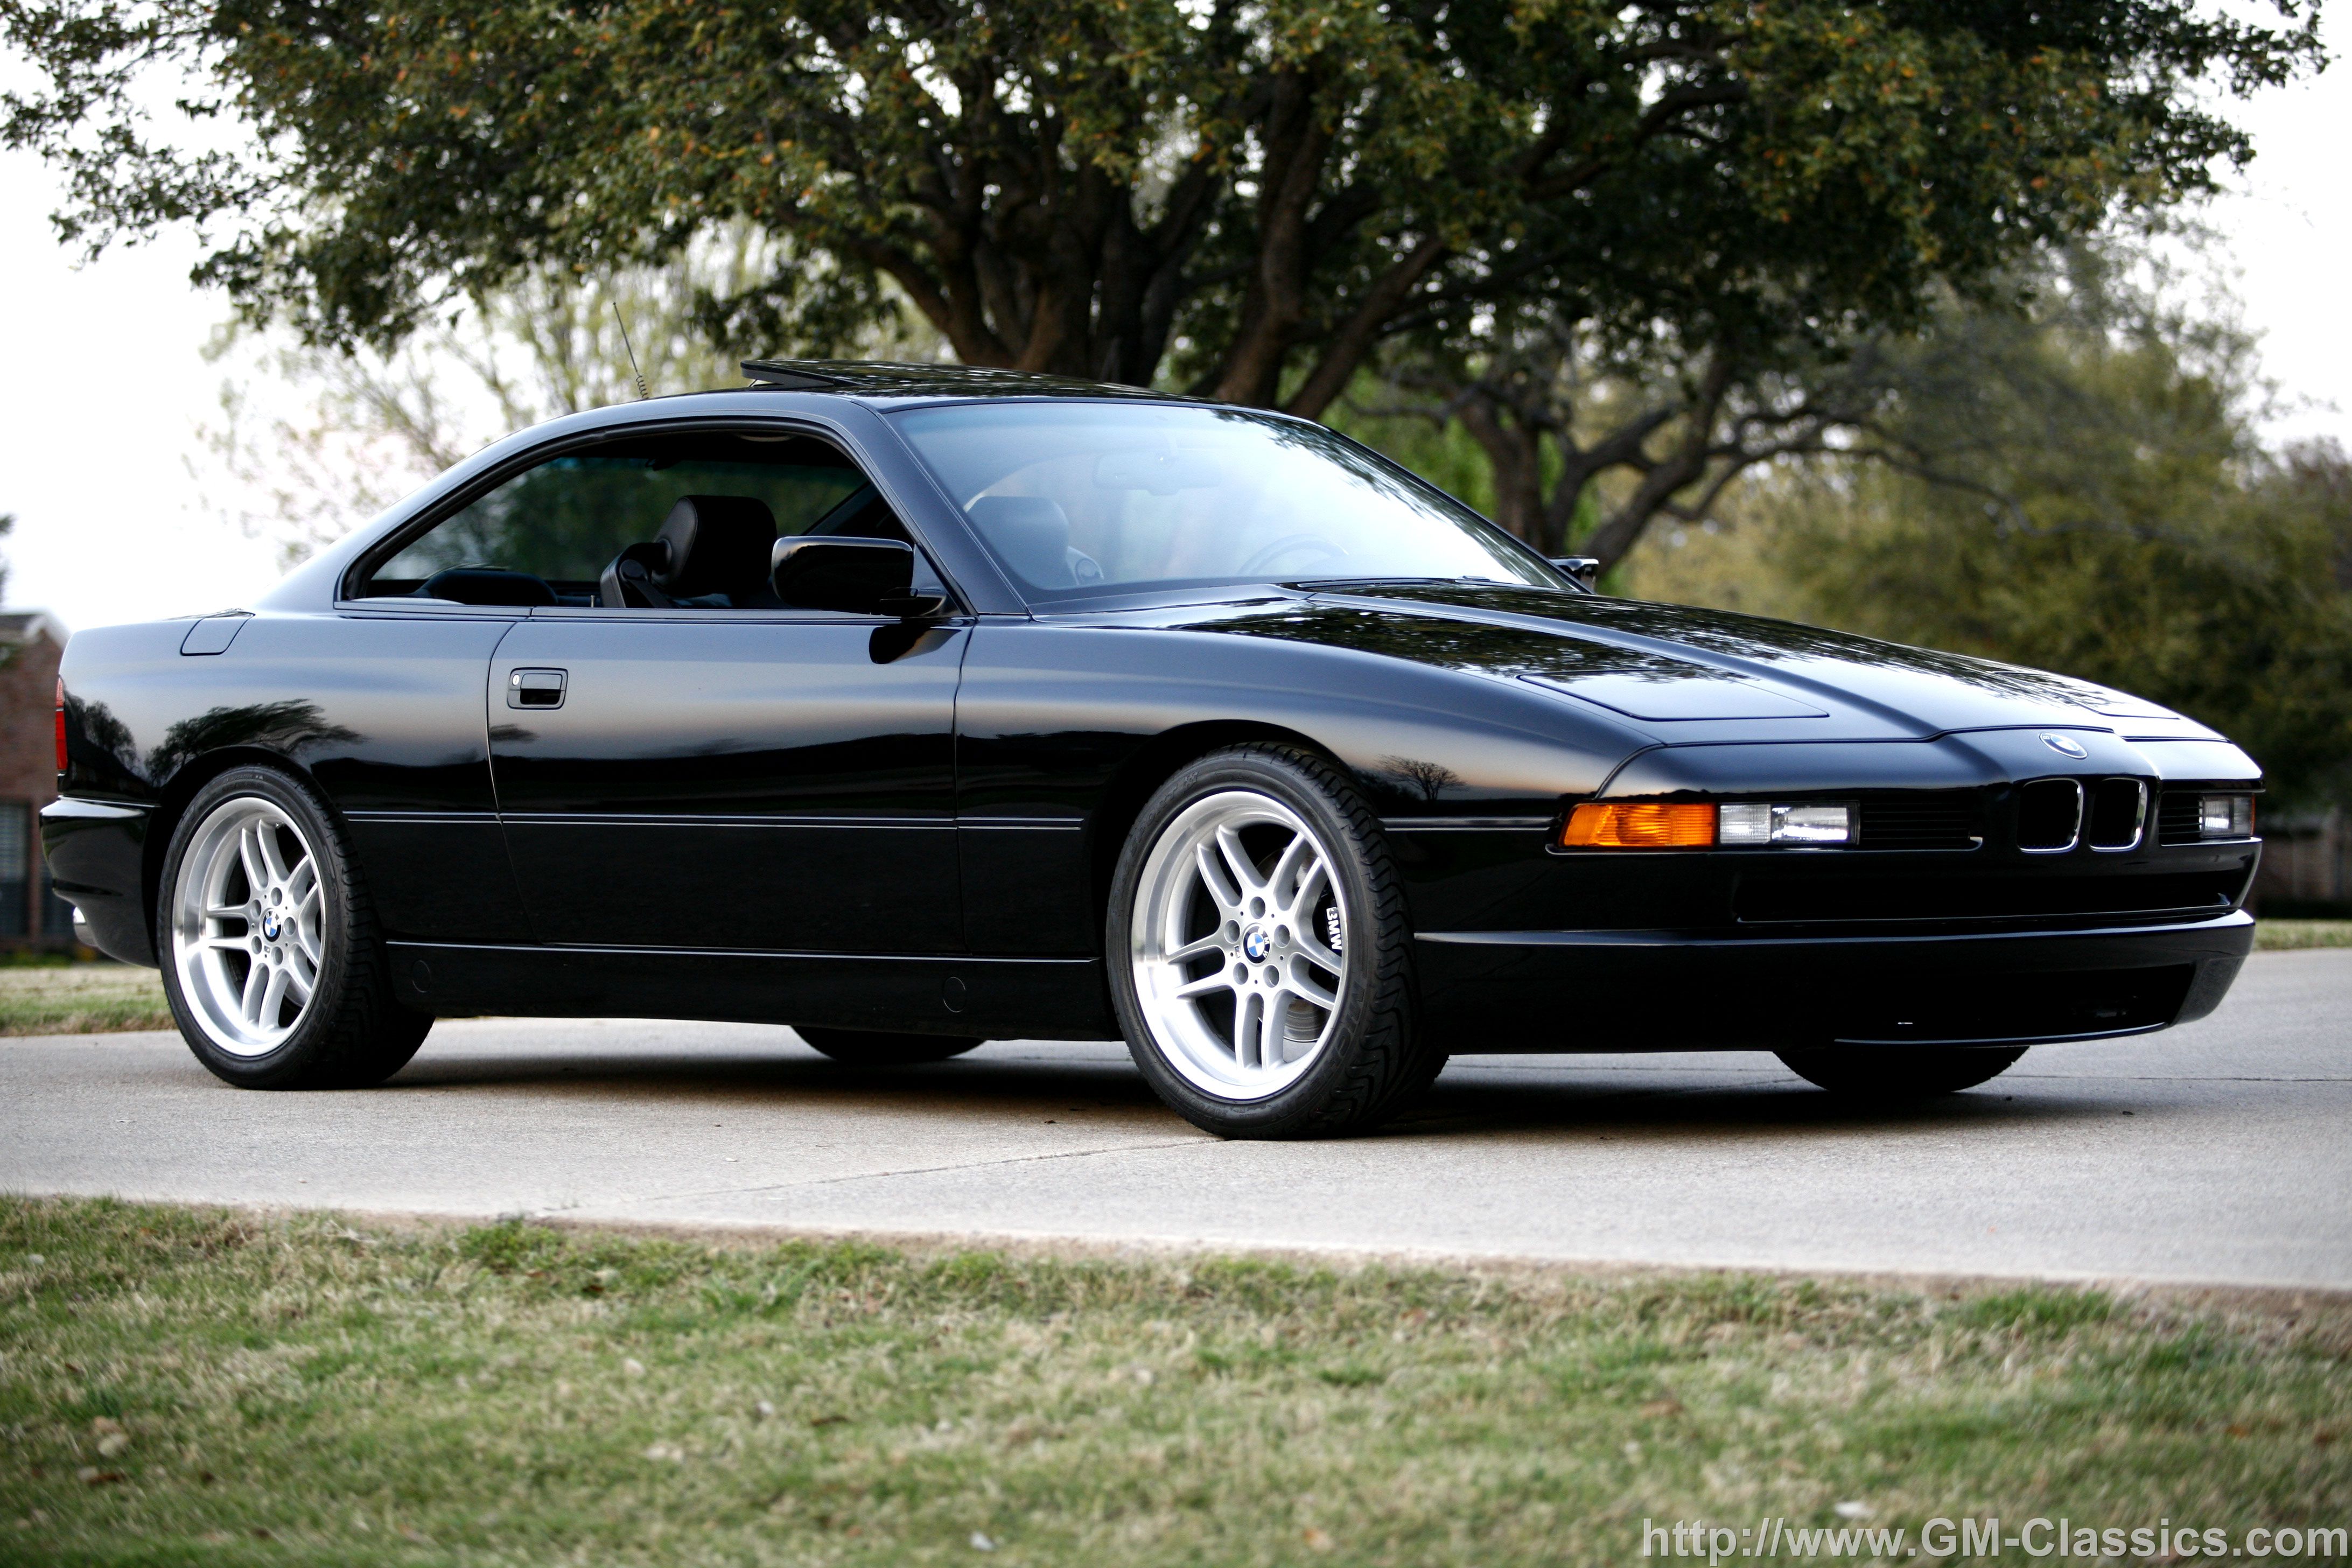  Sales on 1991 Bmw 850 V12 6 Speed Home Page